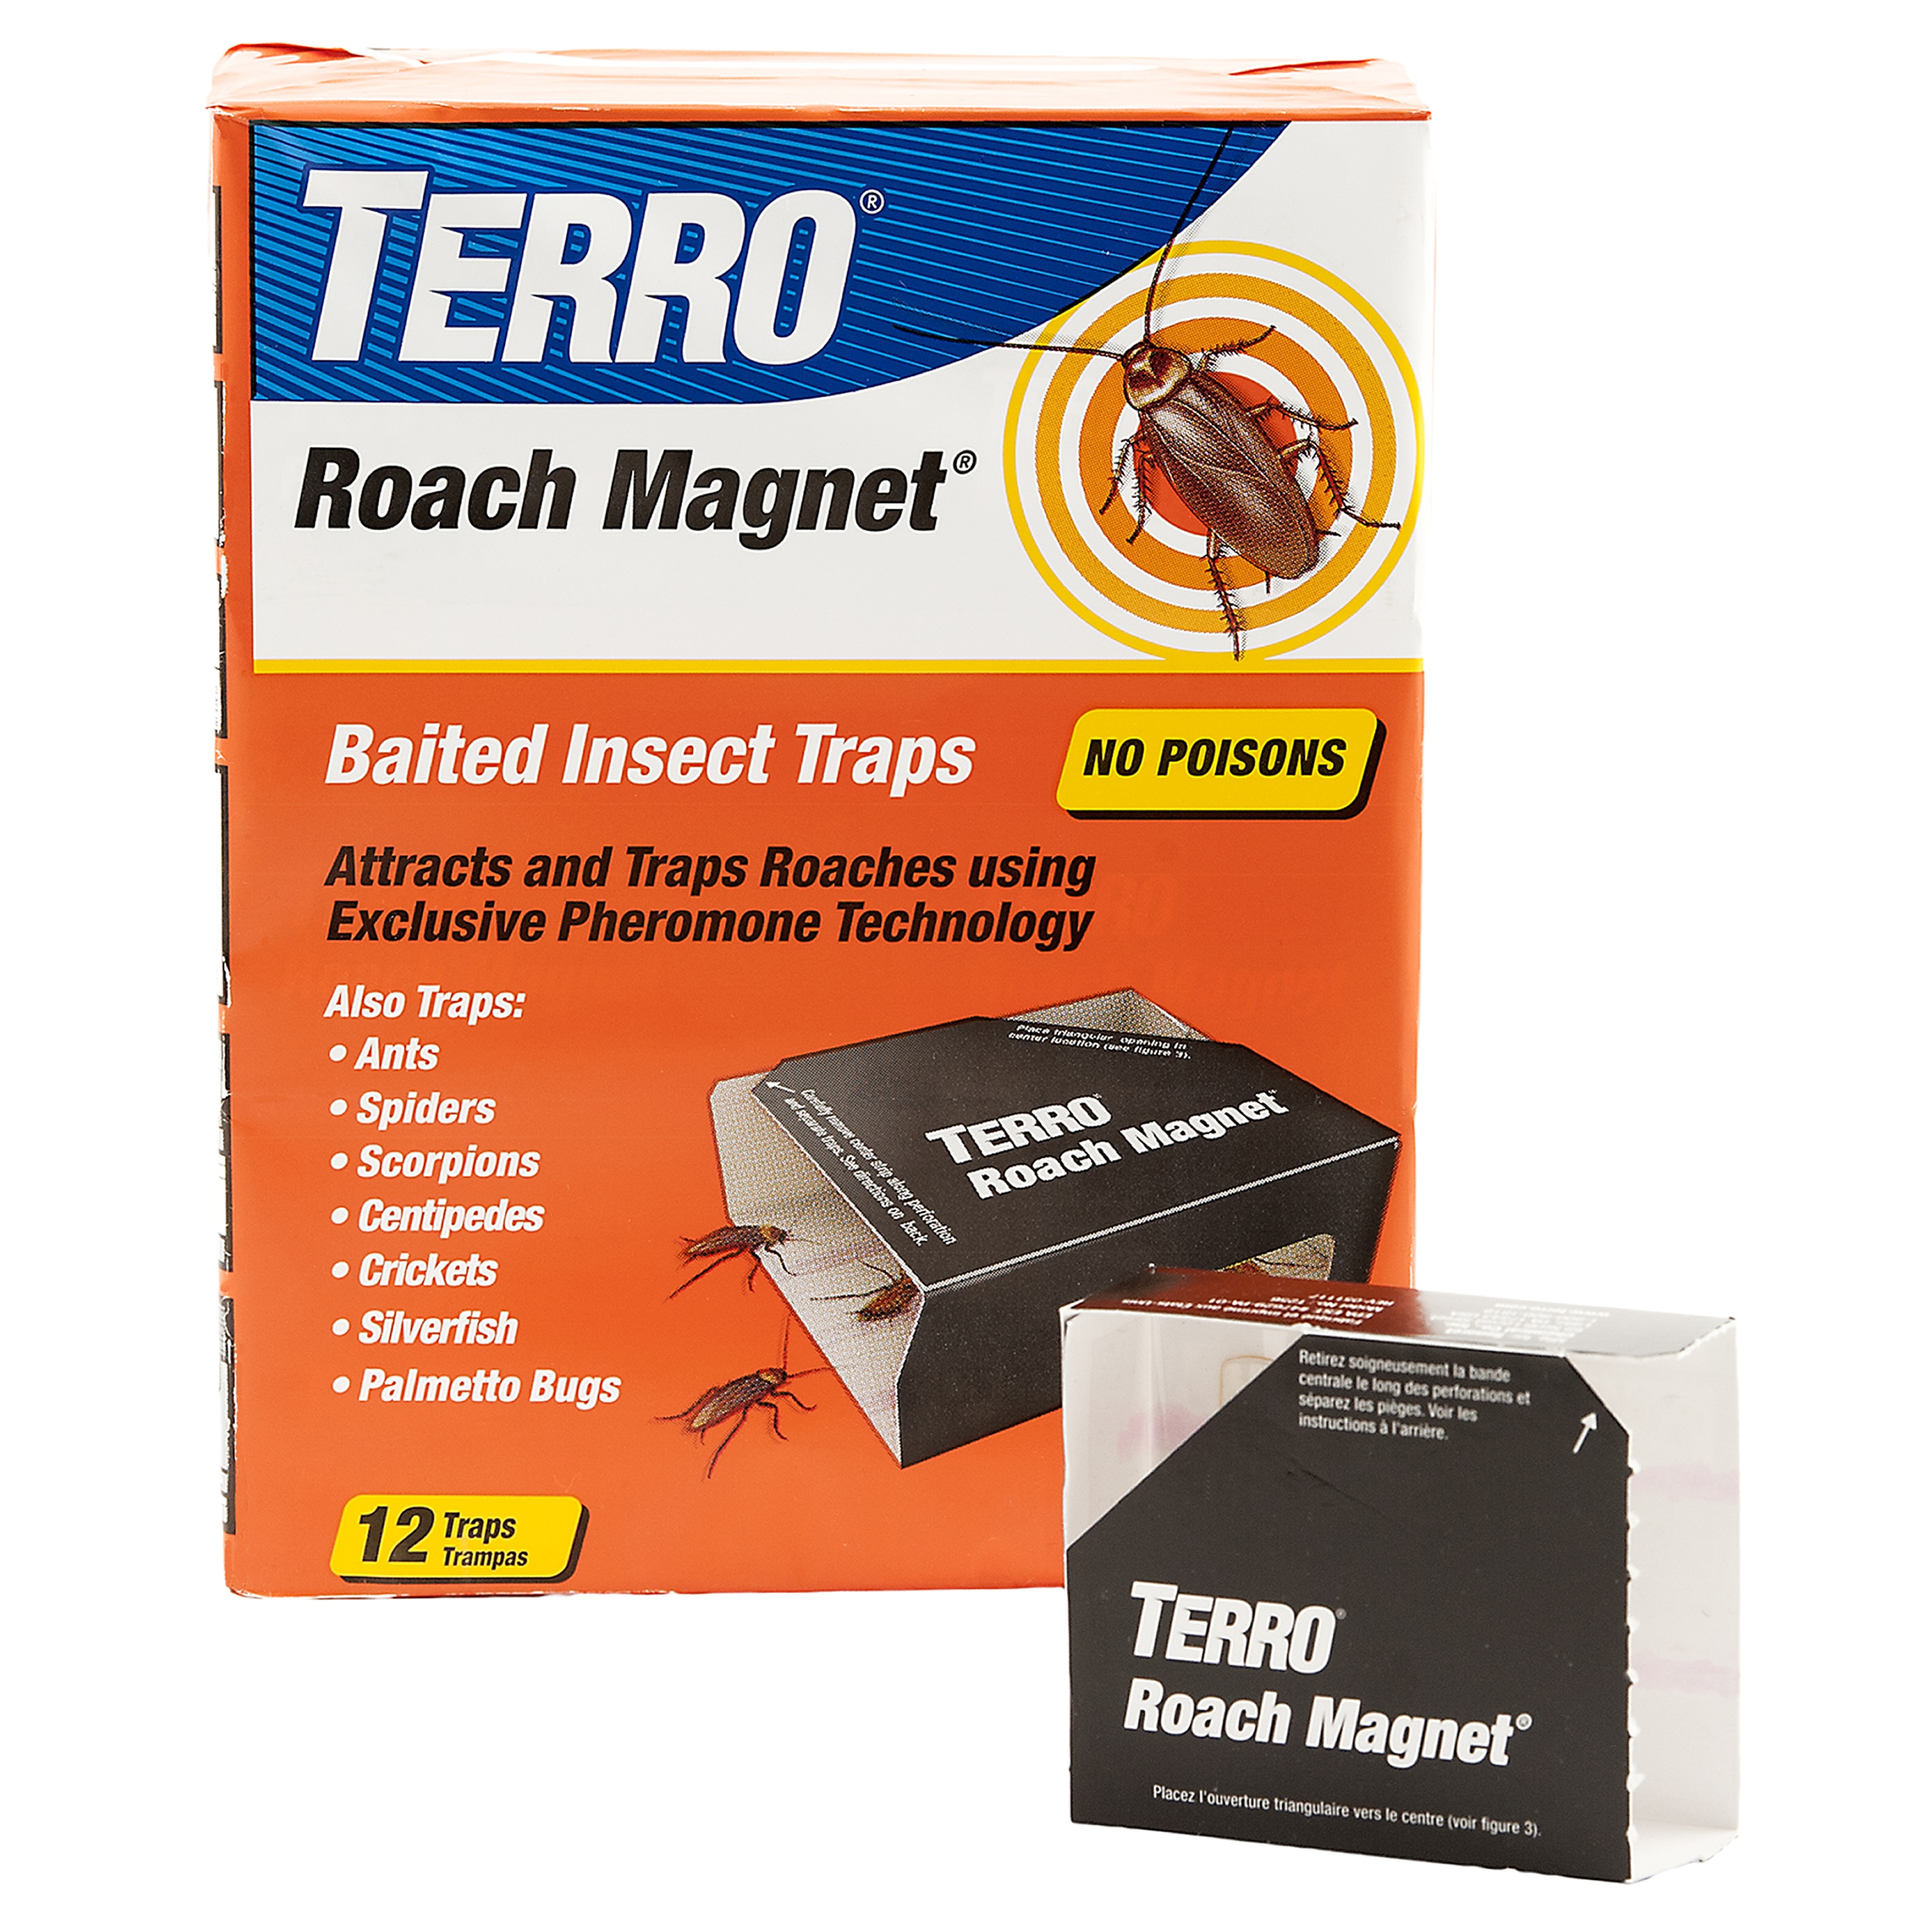 Spider Trap Master/Cockroach Glue Traps/ Disposable Insect Pest Control/ ants 